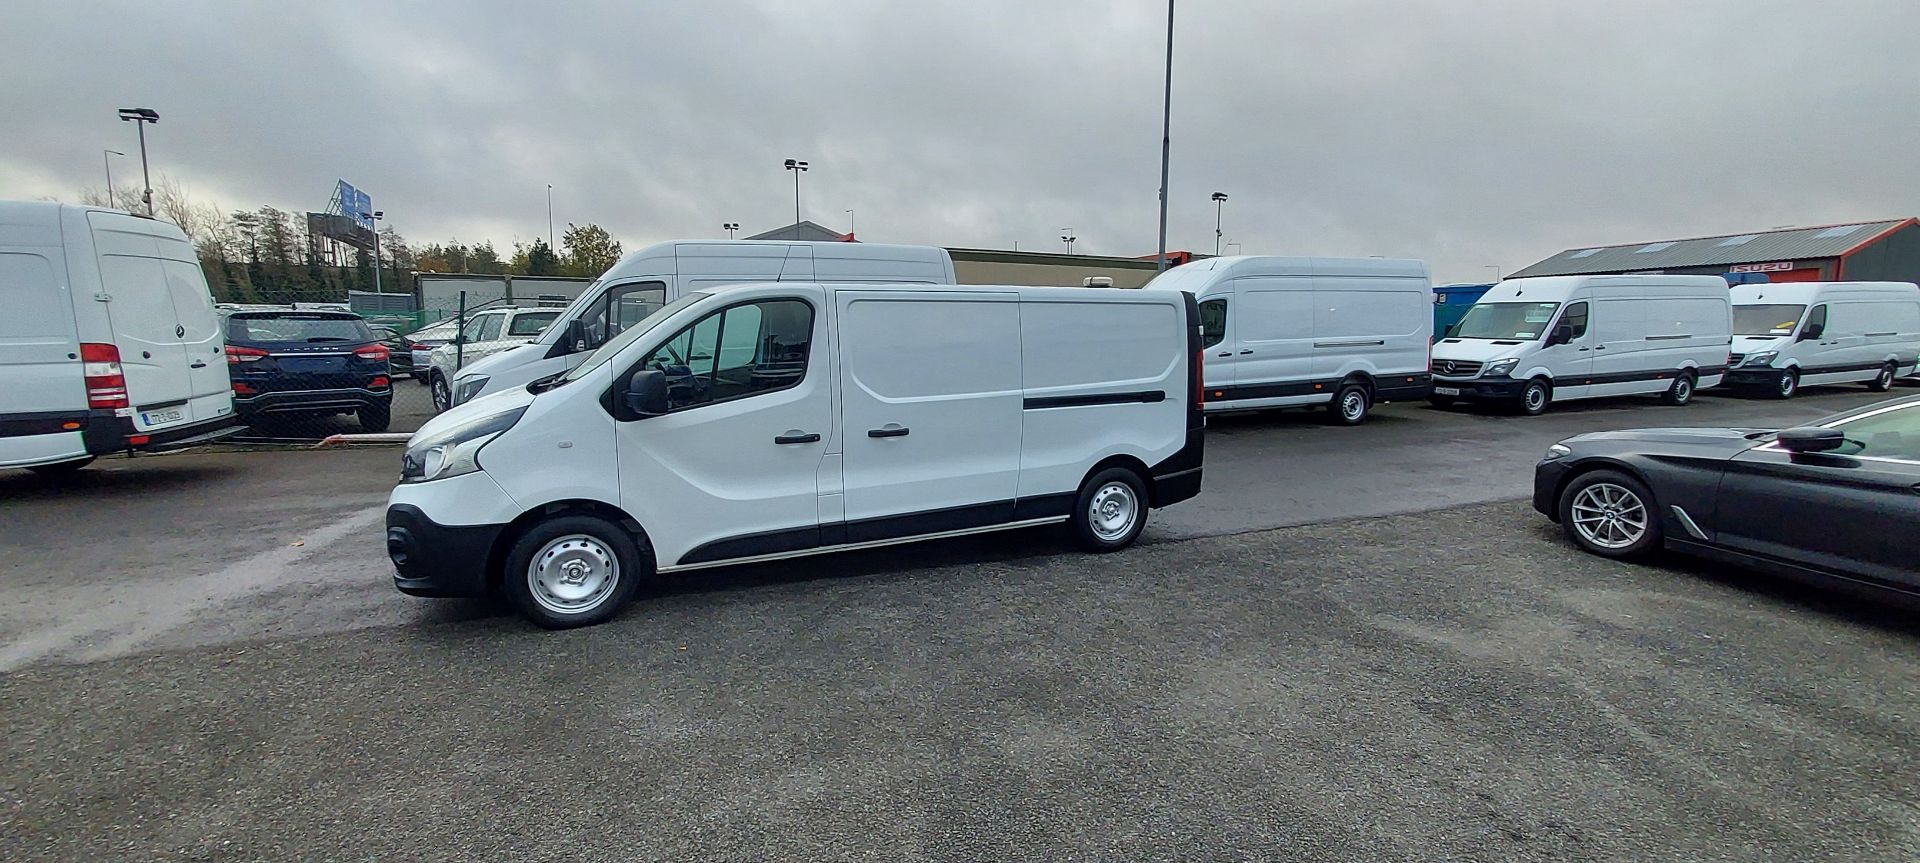 2018 Renault Trafic LL29 DCI 120 Business 3DR (181D39453) Image 4